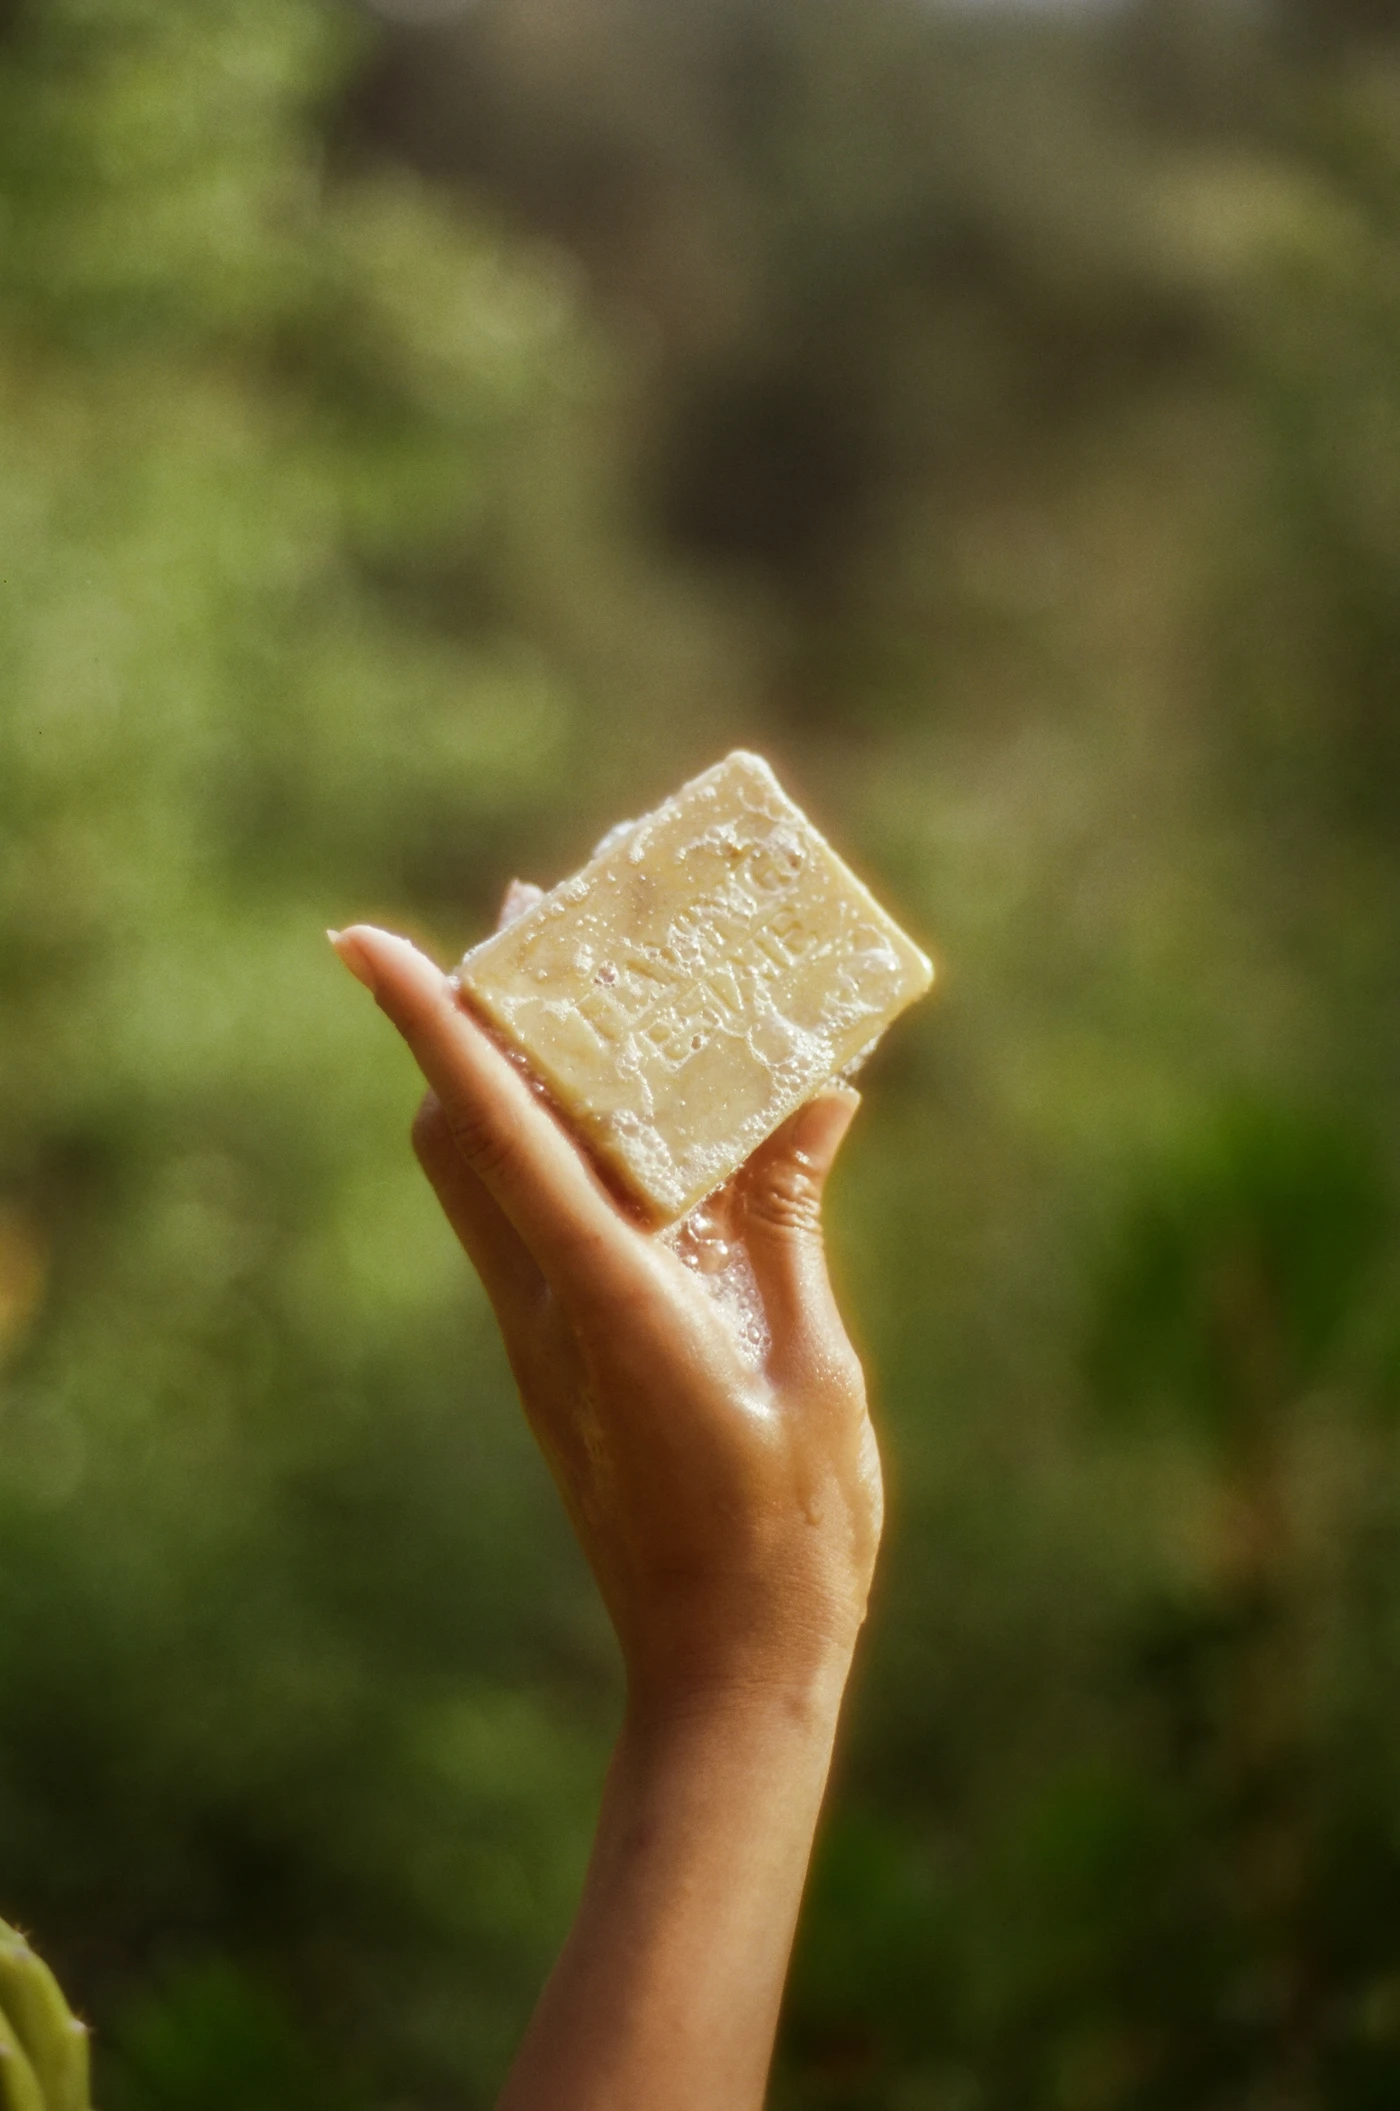 Notes from the Field - Artisanal Garden Soaps